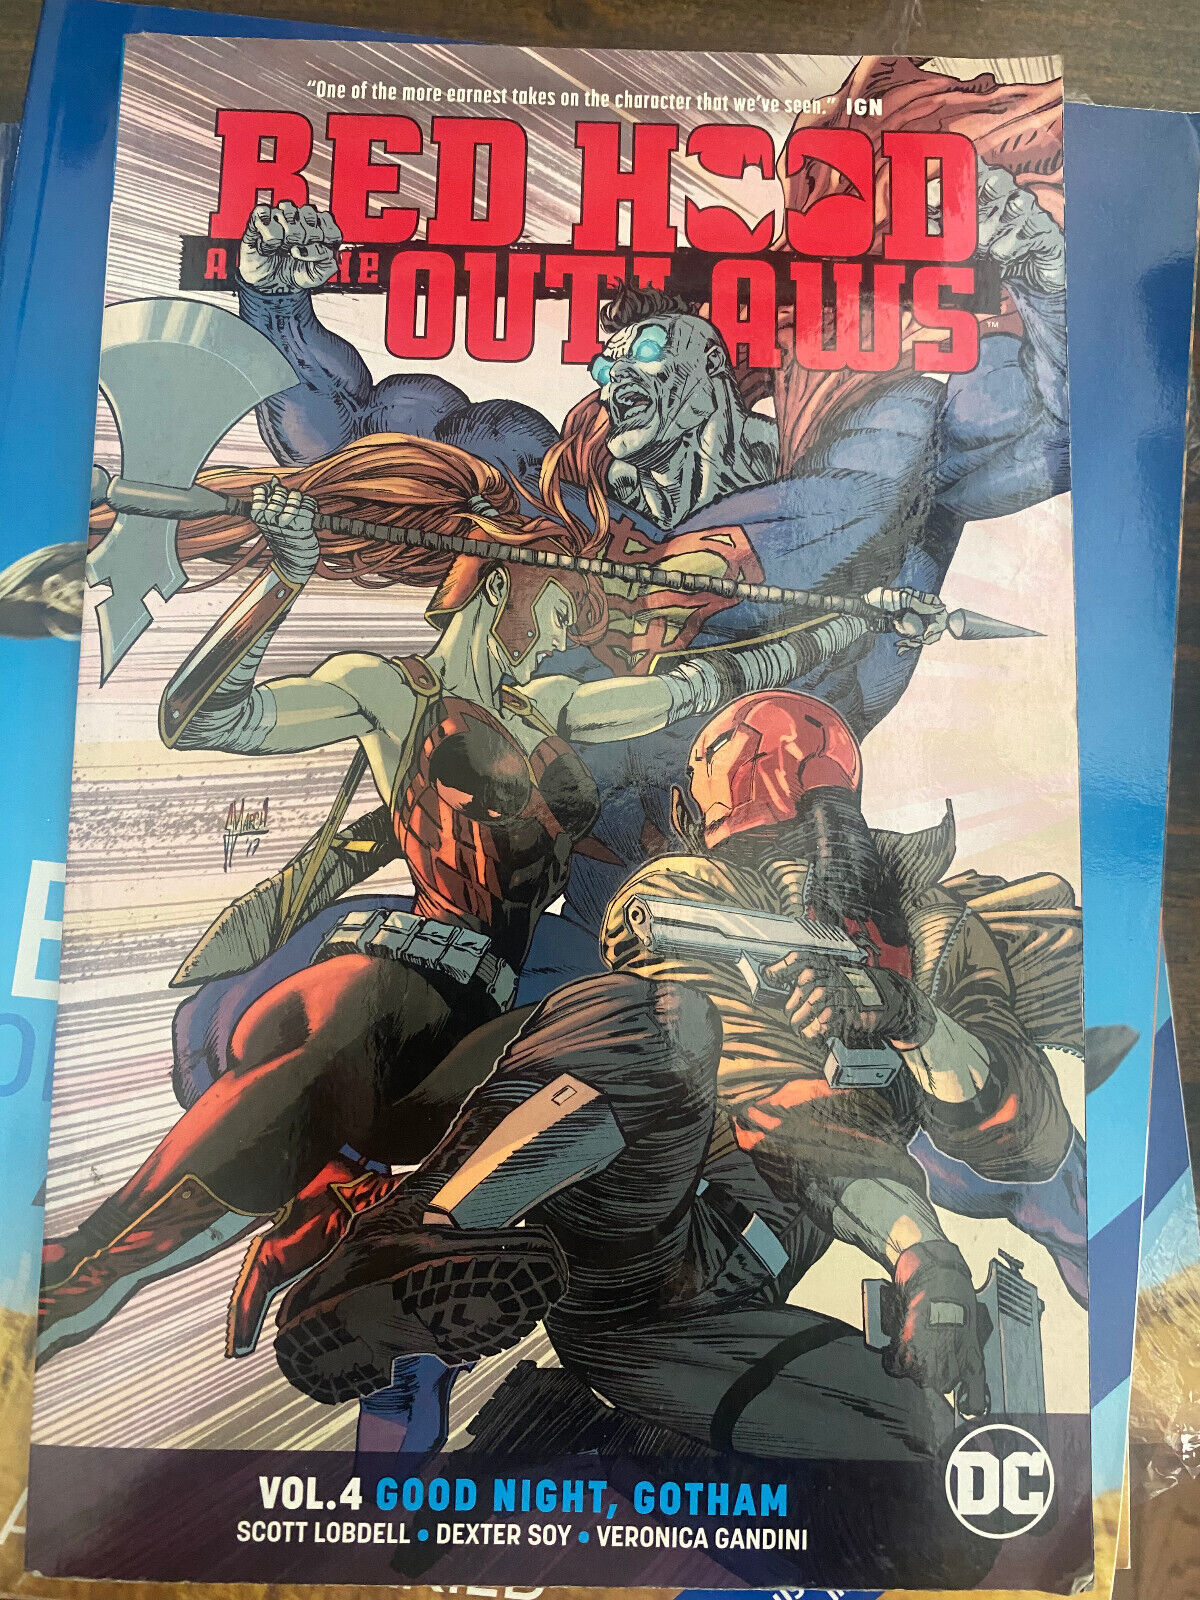 Red Hood and the Outlaws #4 (DC Comics December 2018)